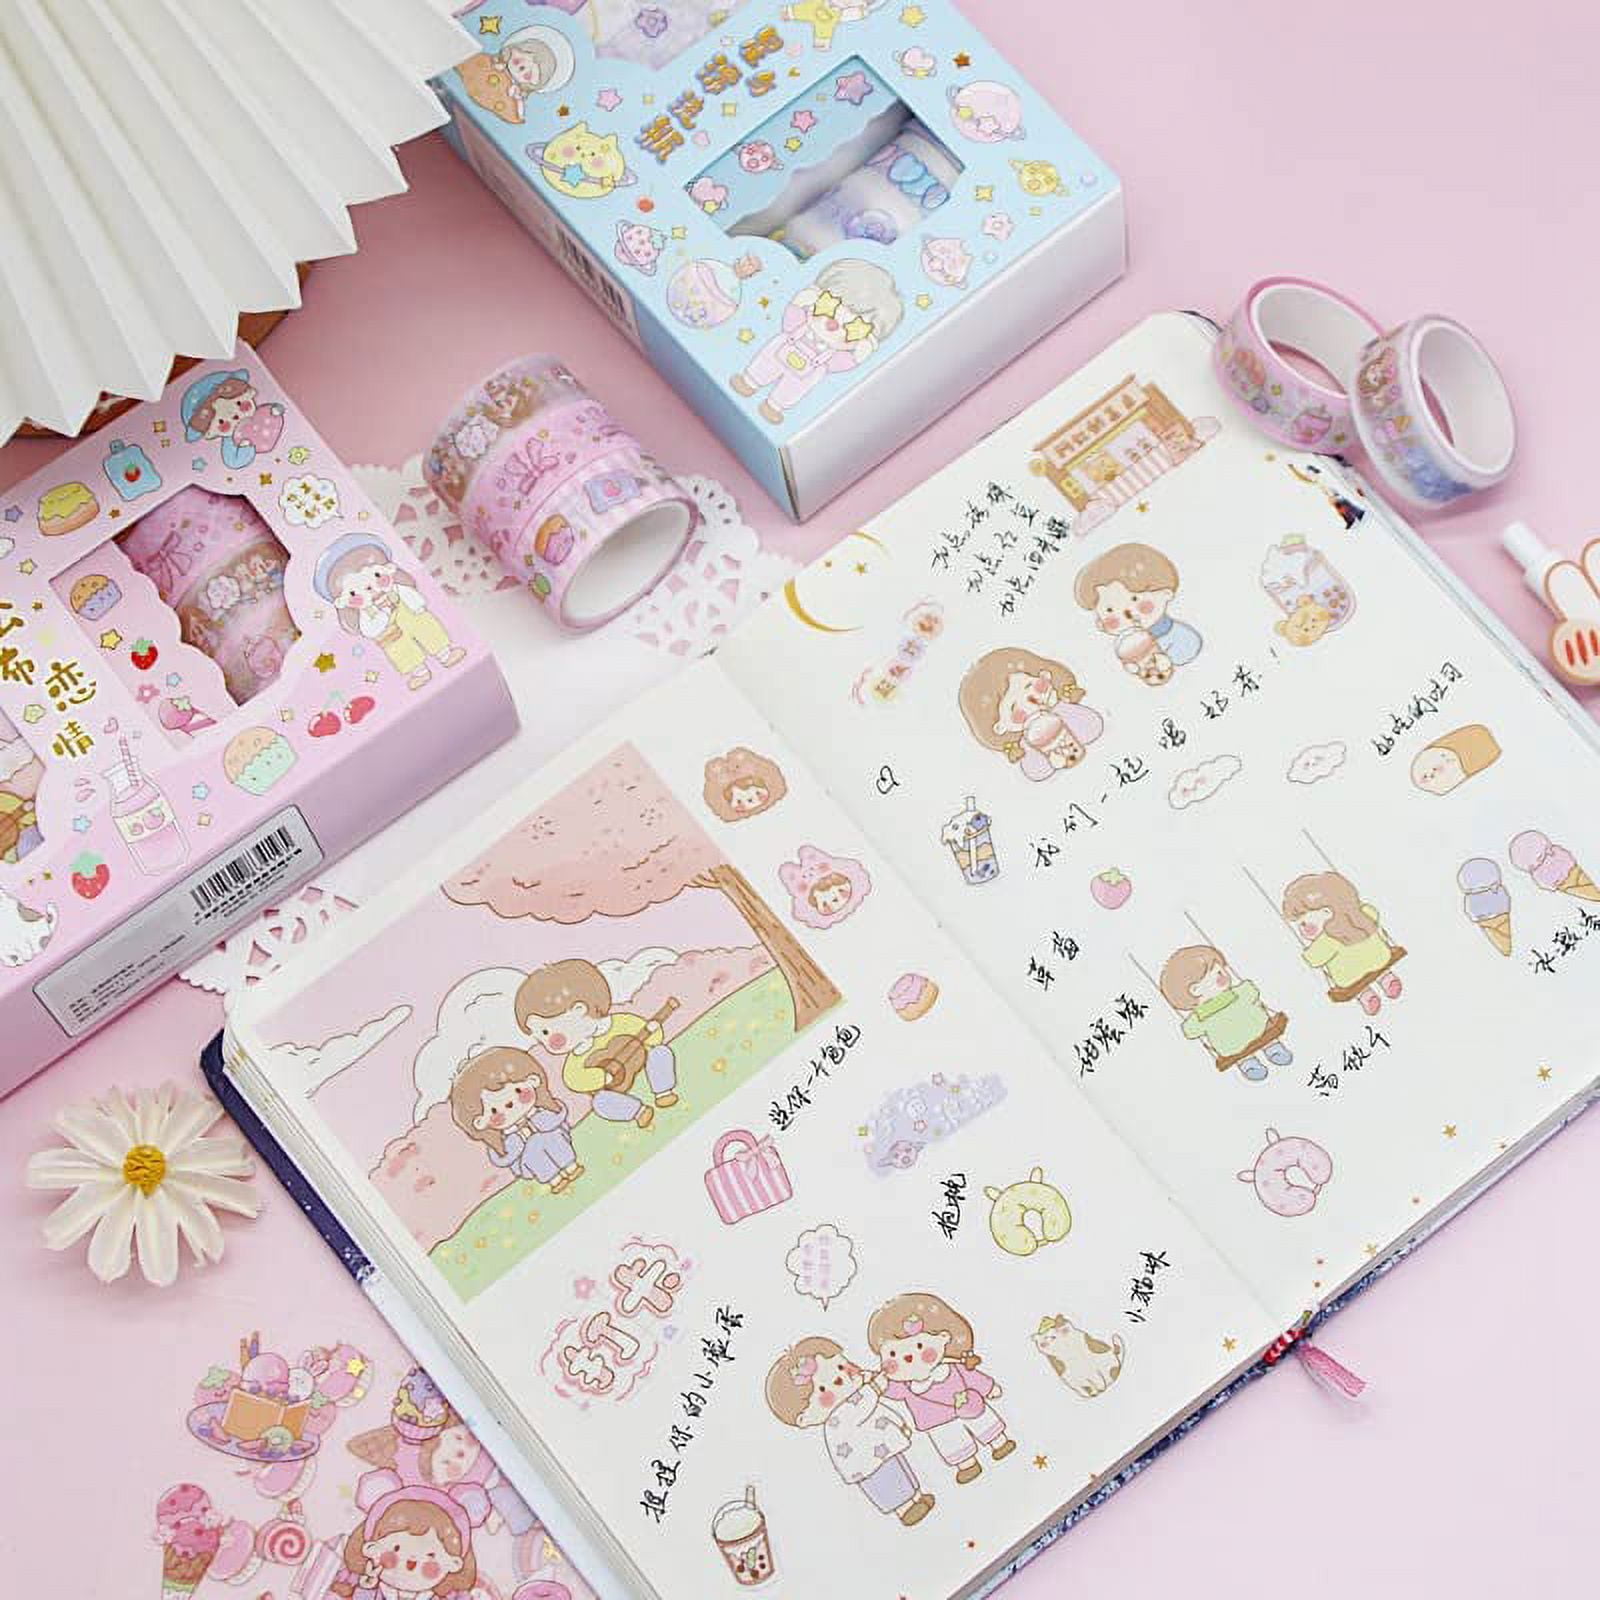 Qiqiyu Vol.5 Word and Phrase Themed Washi Tape, Stickers